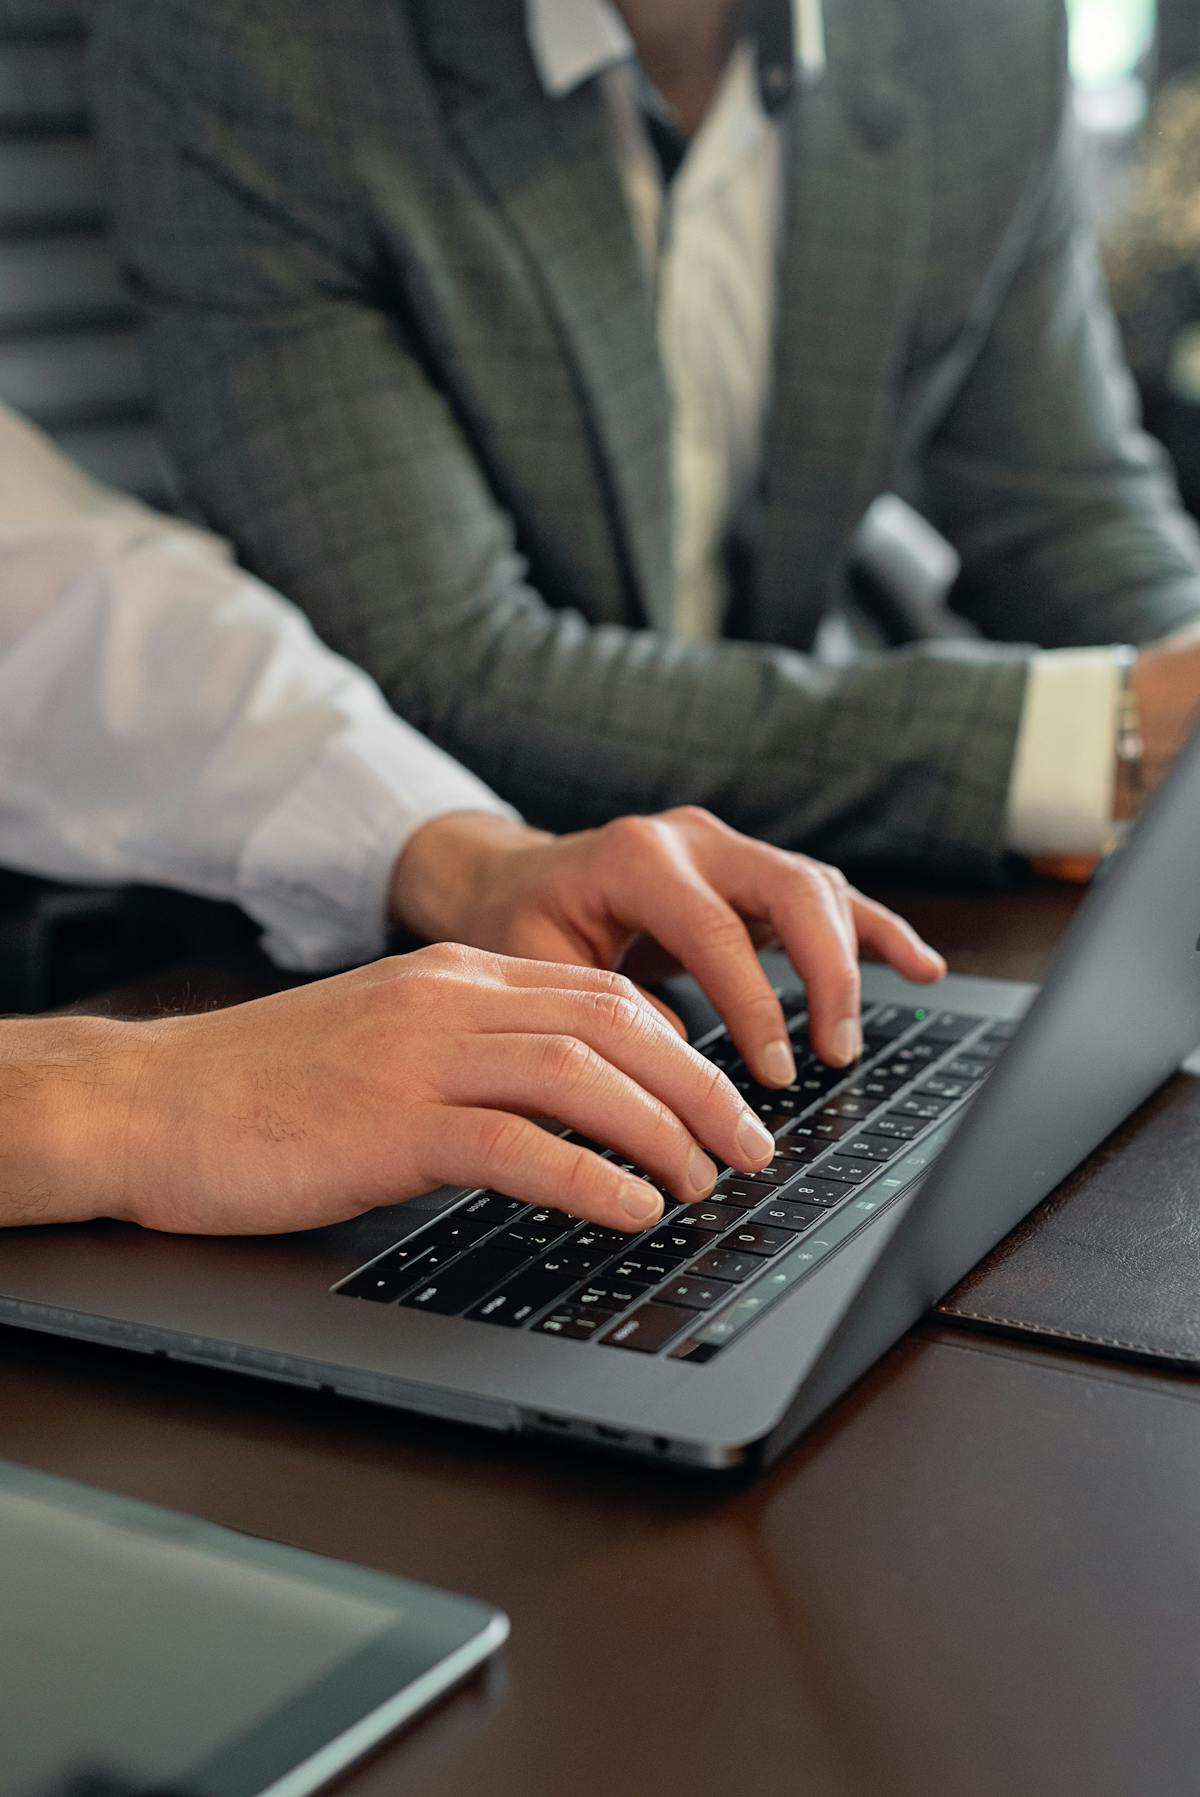 https://www.pexels.com/photo/a-businessperson-typing-on-a-laptop-8939102/